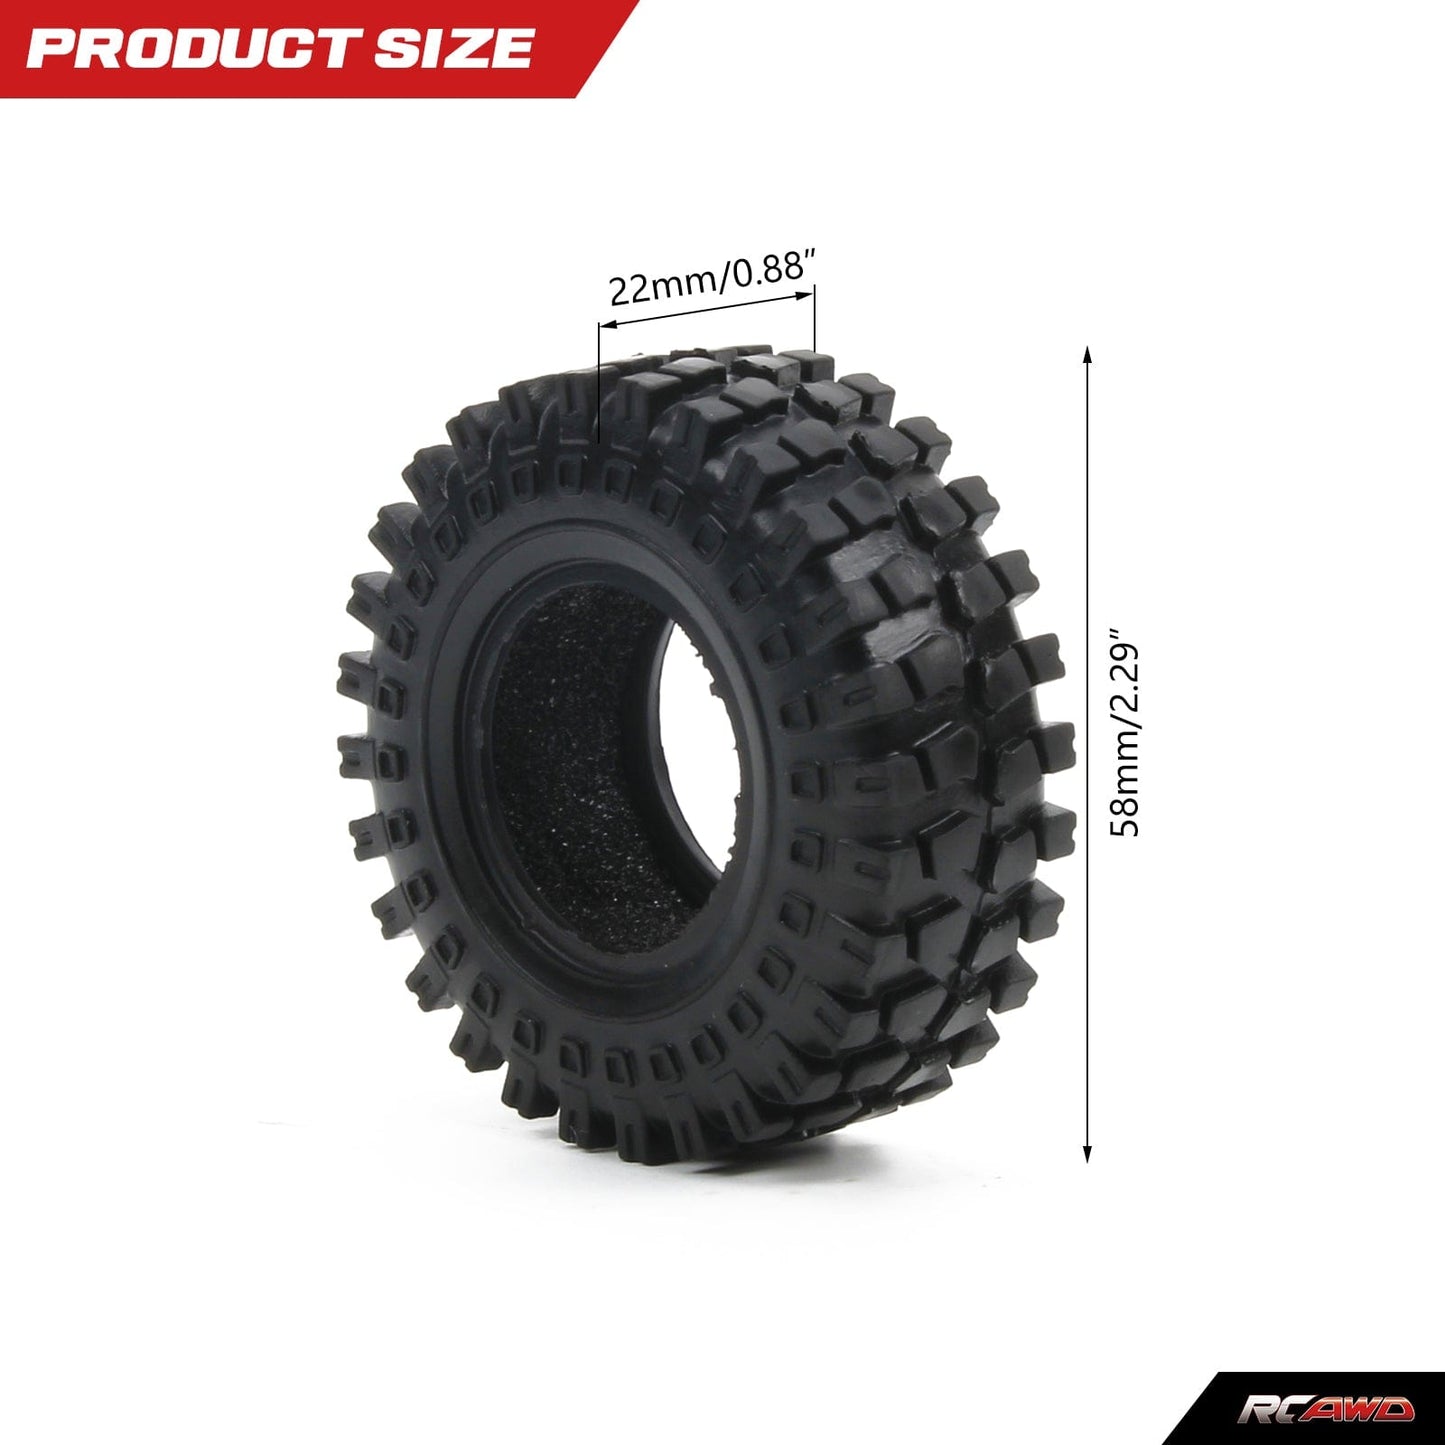 RCAWD 4pcs 58*22mm rubber tire for FMS FCX24 1 - 24 crawlers - RCAWD